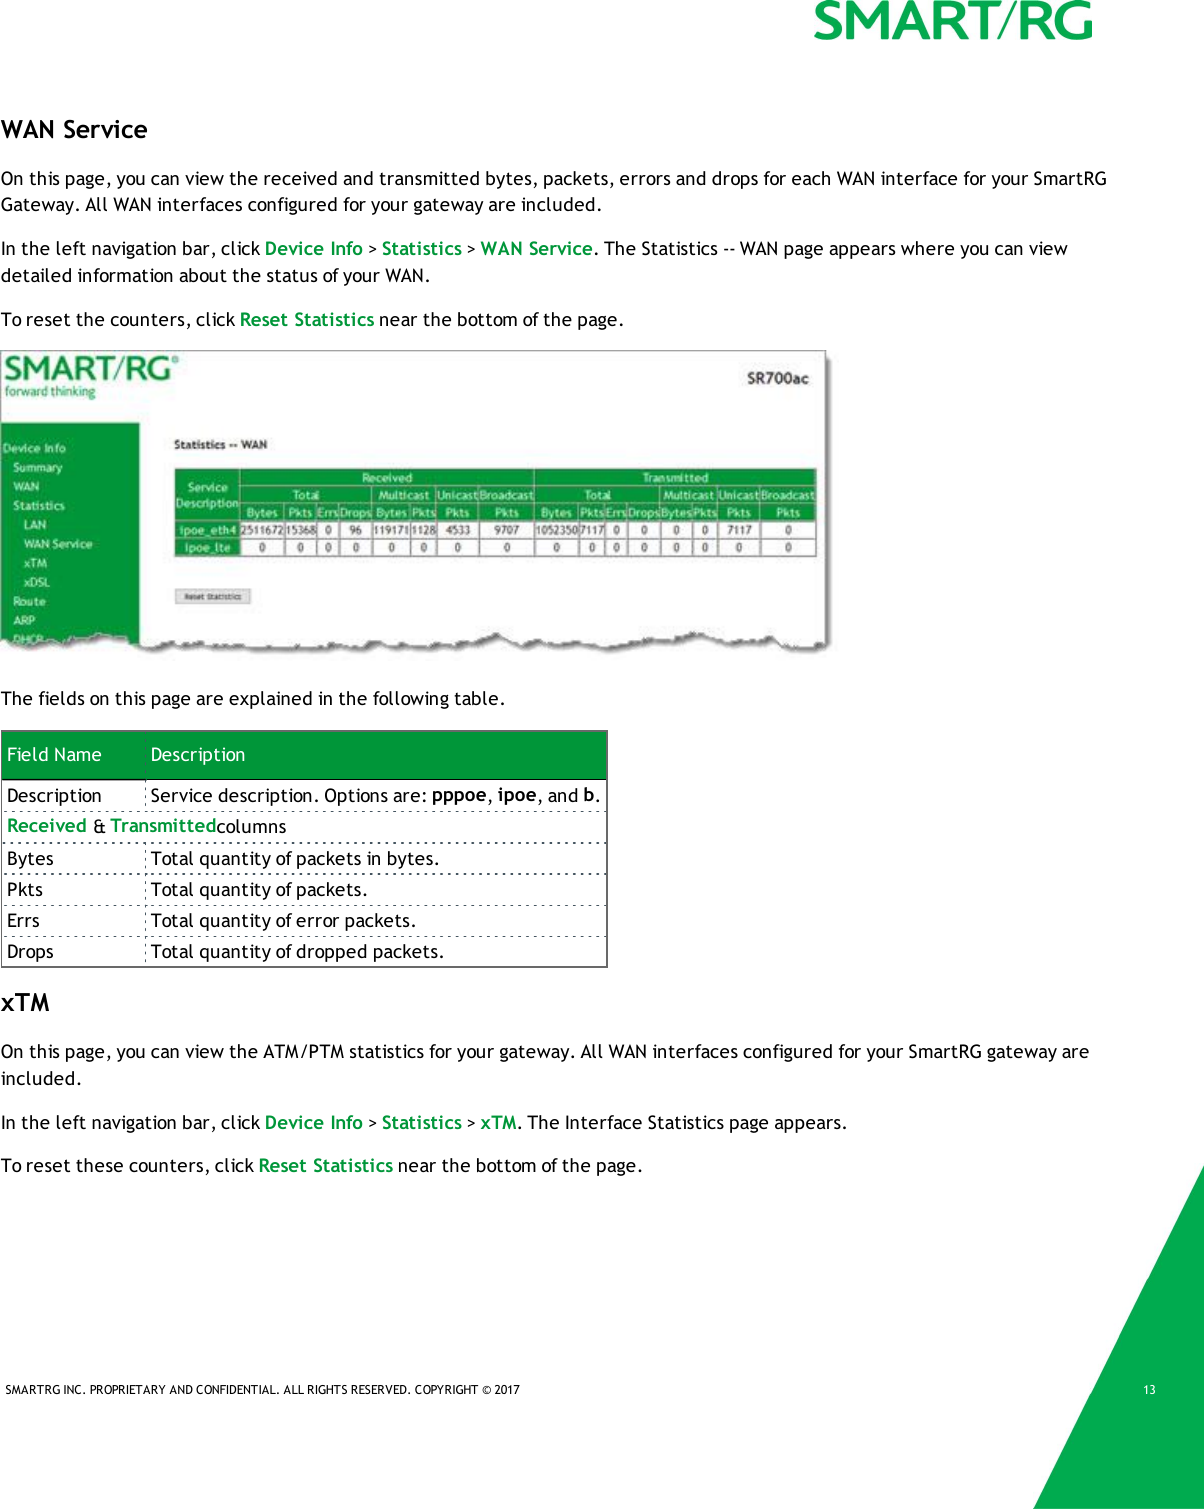 SMARTRG INC. PROPRIETARY AND CONFIDENTIAL. ALL RIGHTS RESERVED. COPYRIGHT © 2017 13WAN ServiceOn this page, you can view the received and transmitted bytes, packets, errors and drops for each WAN interface for your SmartRGGateway. All WAN interfaces configured for your gateway are included.In the left navigation bar, click Device Info &gt;Statistics &gt;WAN Service. The Statistics -- WAN page appears where you can viewdetailed information about the status of your WAN.To reset the counters, click Reset Statistics near the bottom of the page.The fields on this page are explained in the following table.Field Name DescriptionDescription Service description. Options are: pppoe,ipoe, and b.Received &amp;TransmittedcolumnsBytes Total quantity of packets in bytes.Pkts Total quantity of packets.Errs Total quantity of error packets.Drops Total quantity of dropped packets.xTMOn this page, you can view the ATM/PTM statistics for your gateway. All WAN interfaces configured for your SmartRG gateway areincluded.In the left navigation bar, click Device Info &gt;Statistics &gt;xTM. The Interface Statistics page appears.To reset these counters, click Reset Statistics near the bottom of the page.